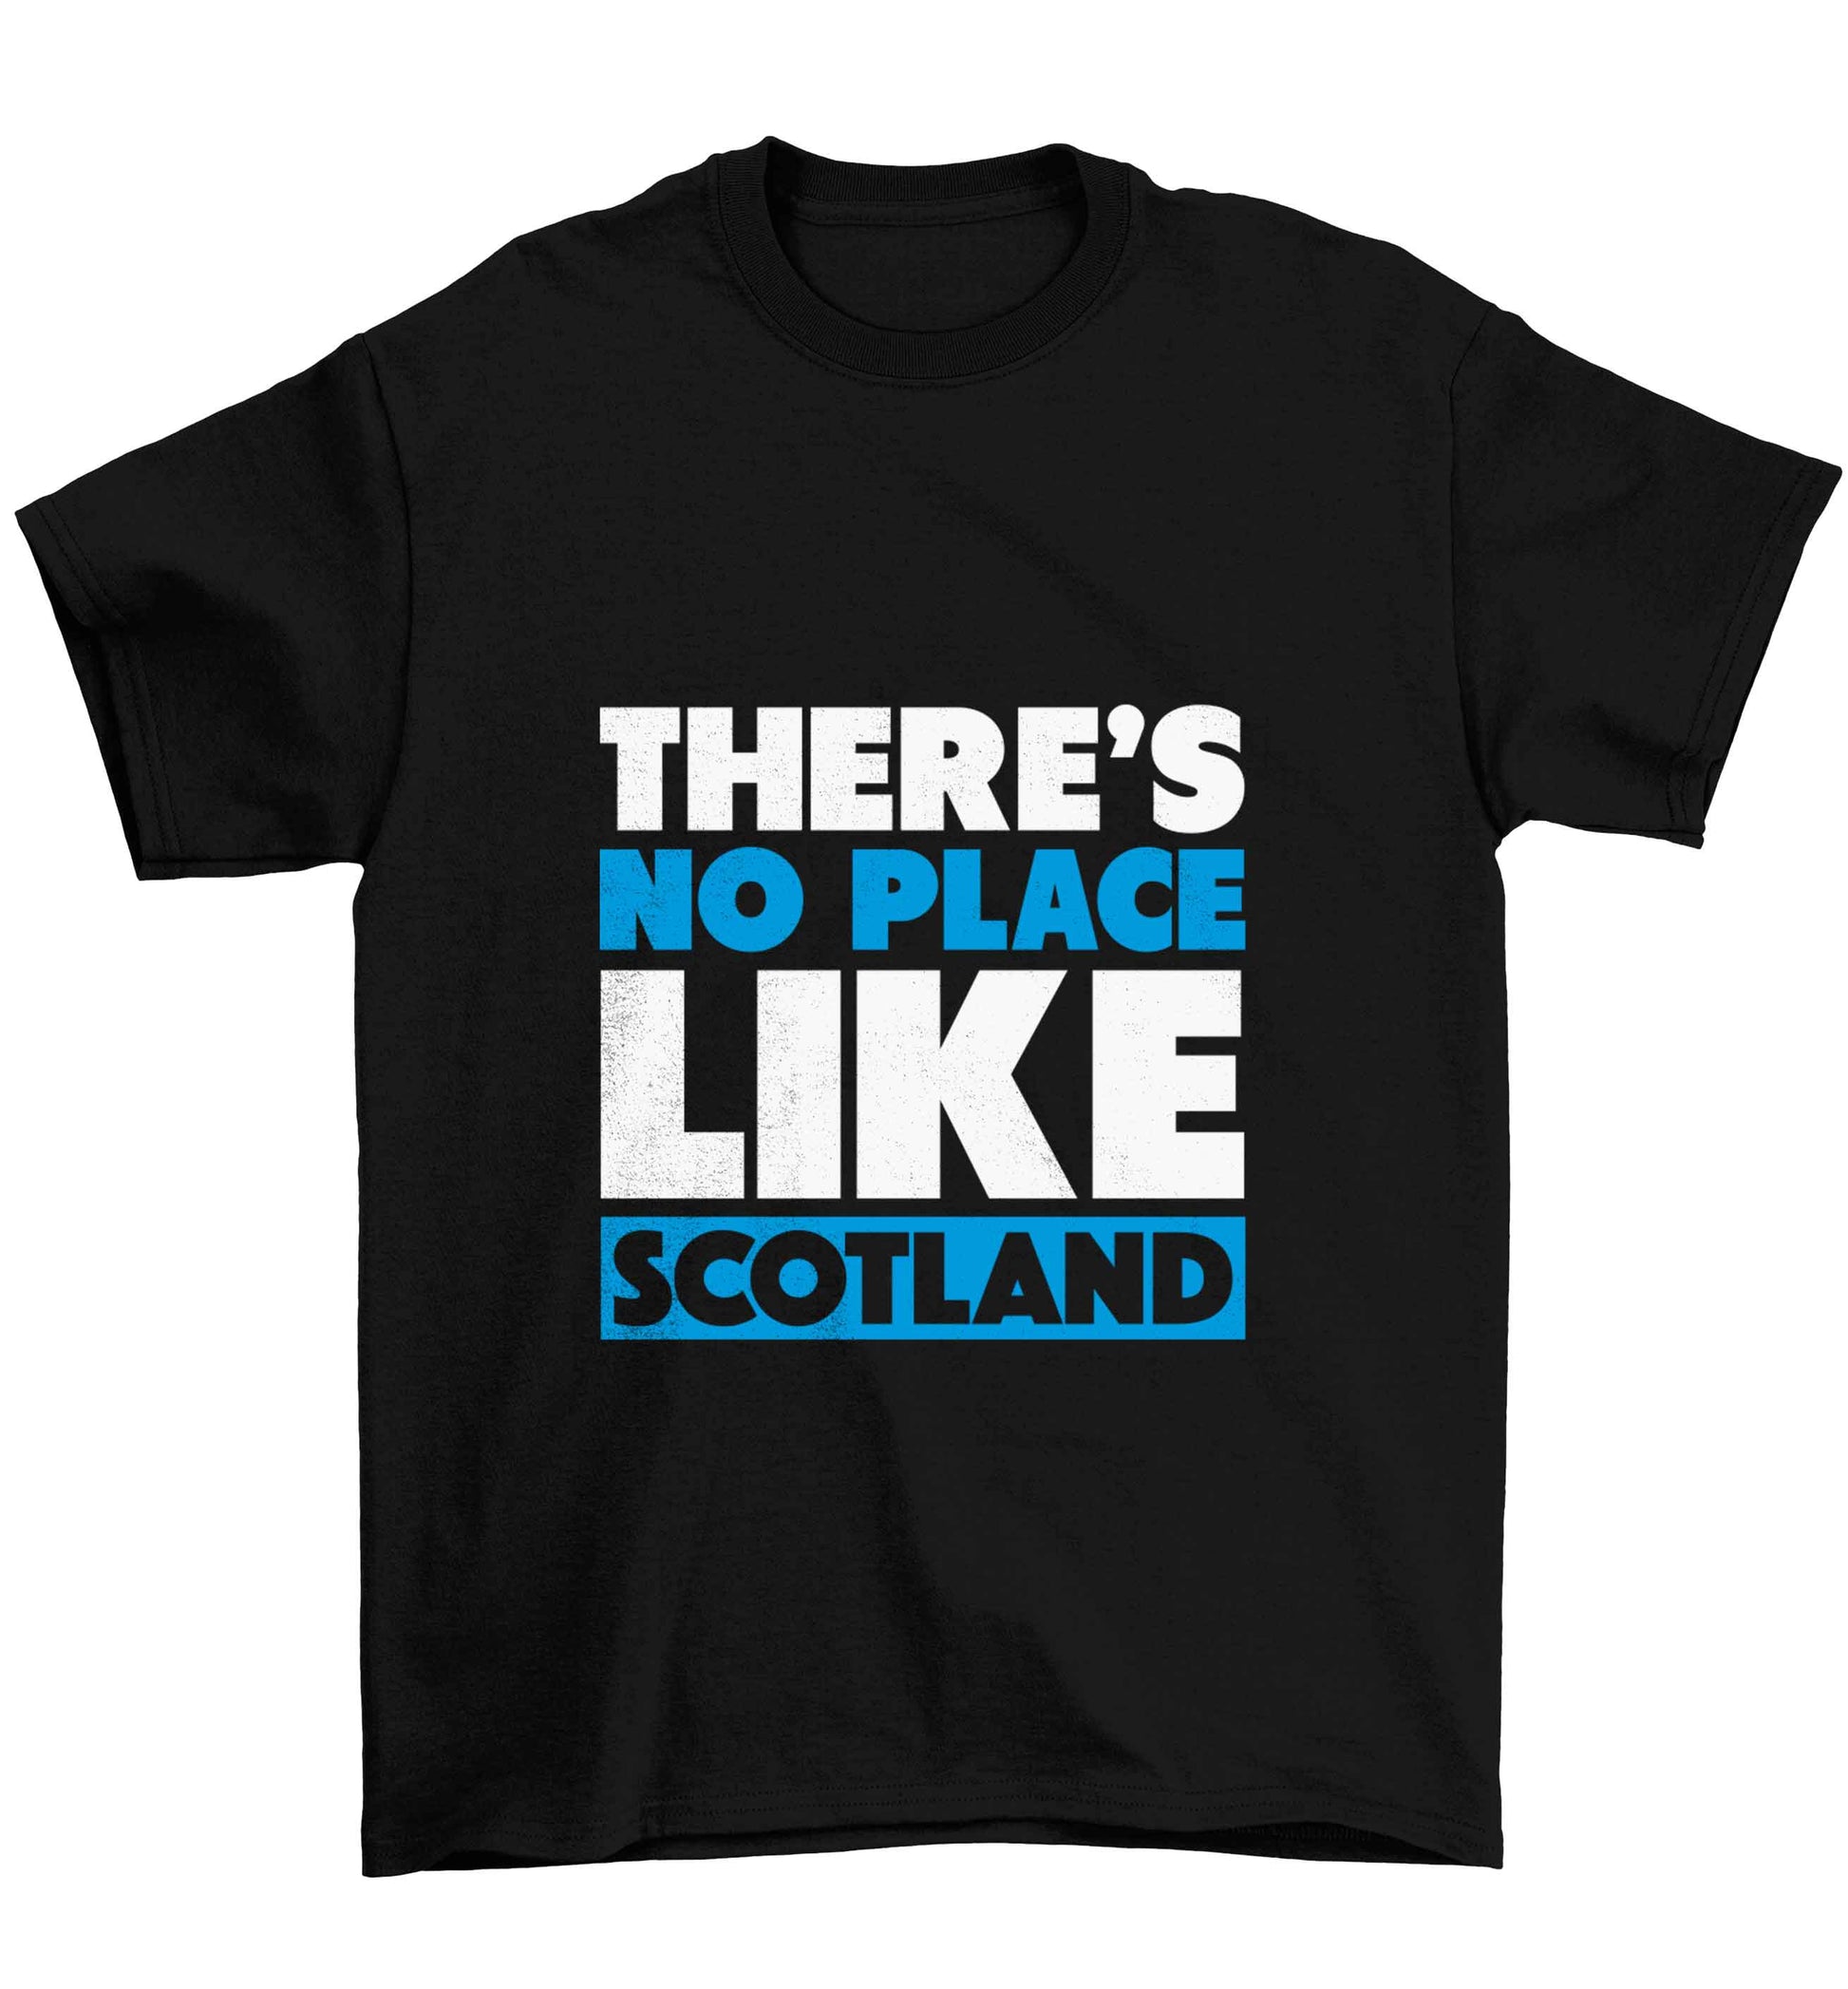 There's no place like Scotland Children's black Tshirt 12-13 Years